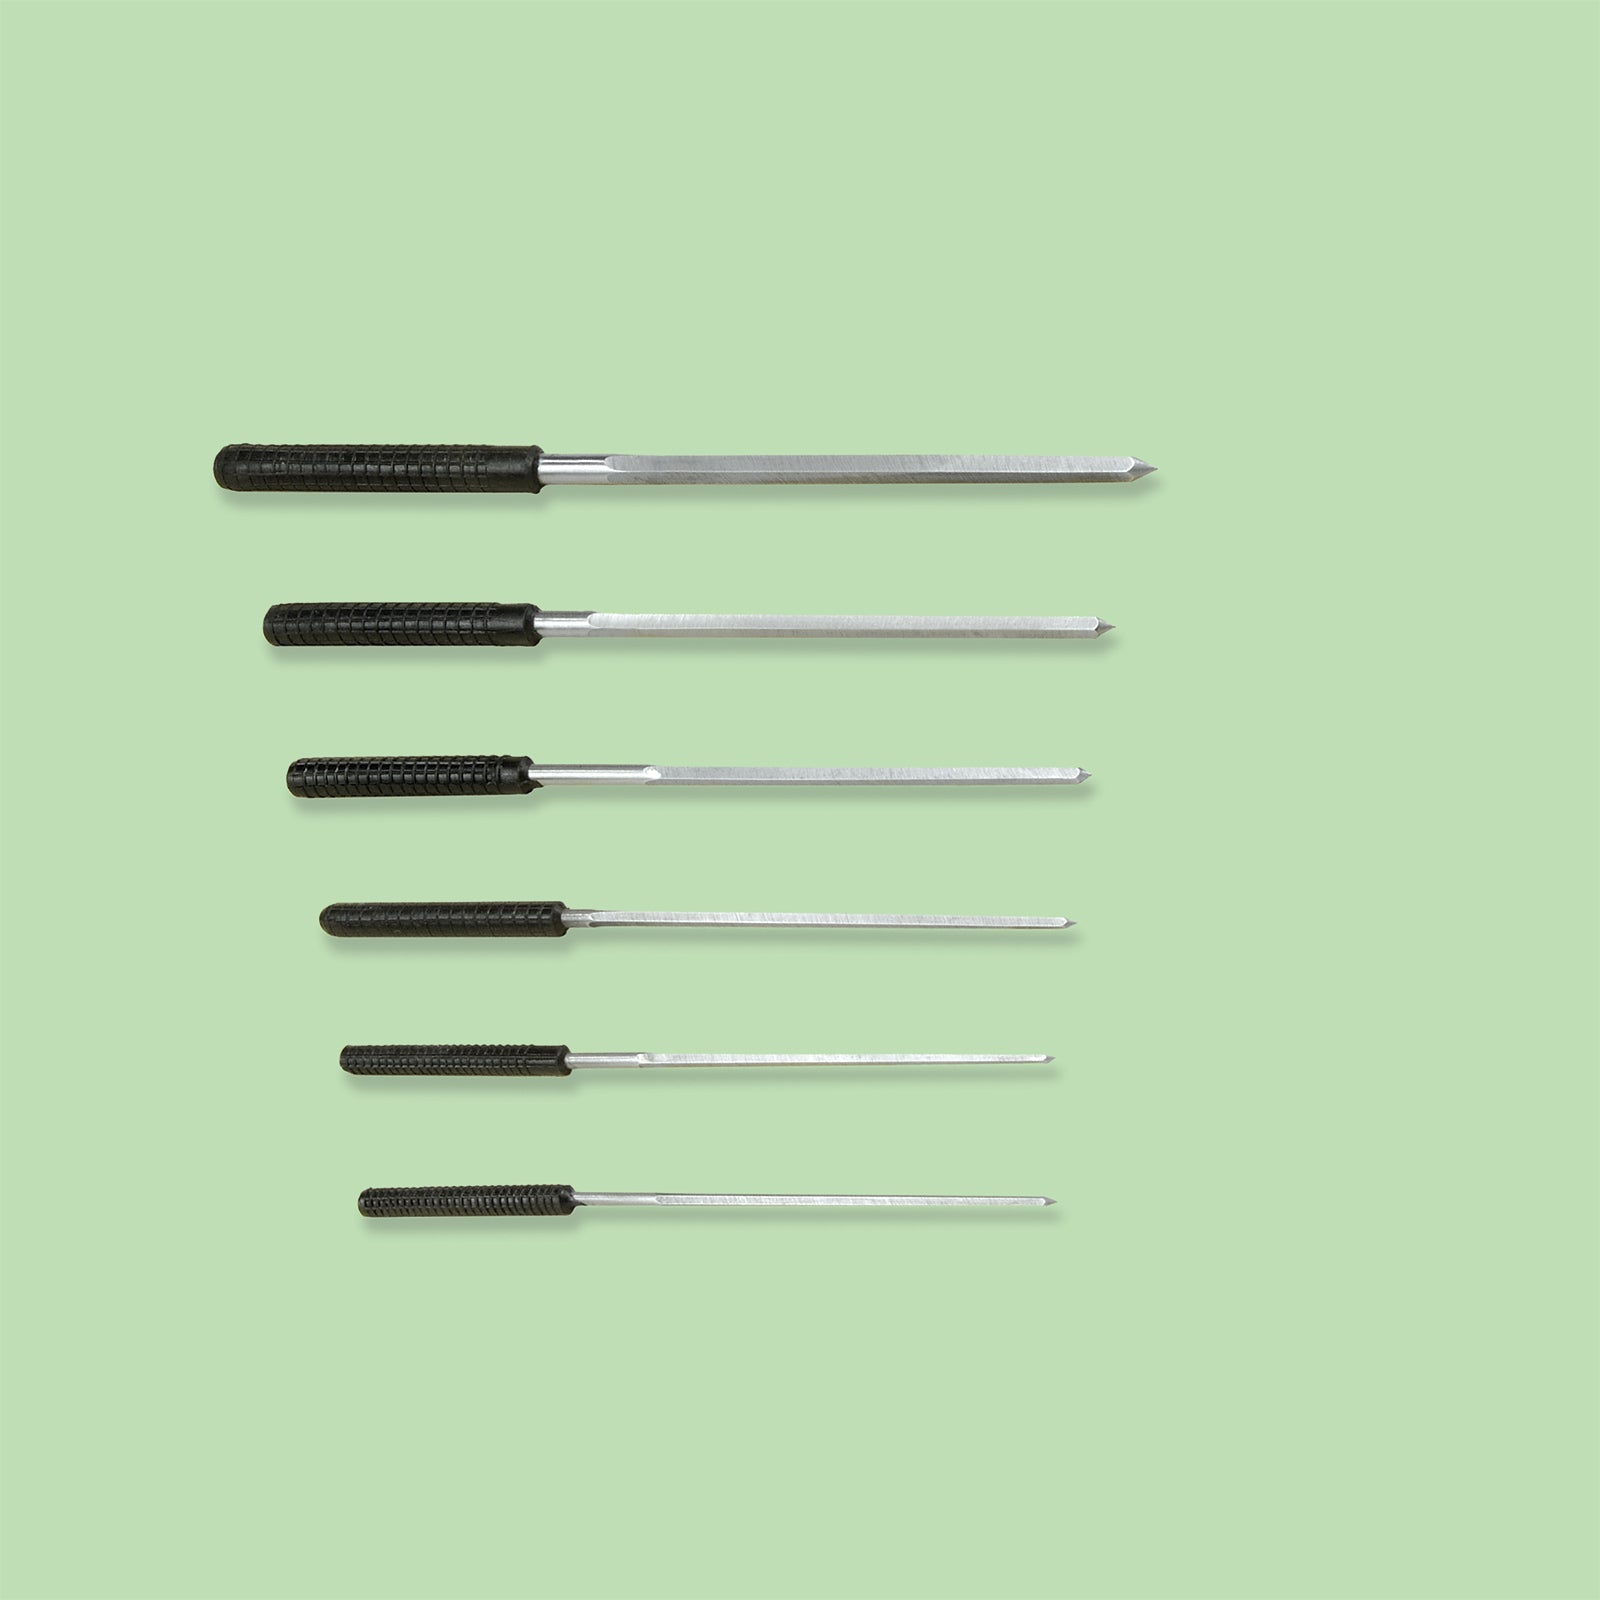 Micro - Size Precision Reamers (Set of 6) - Micro - Mark Reamers